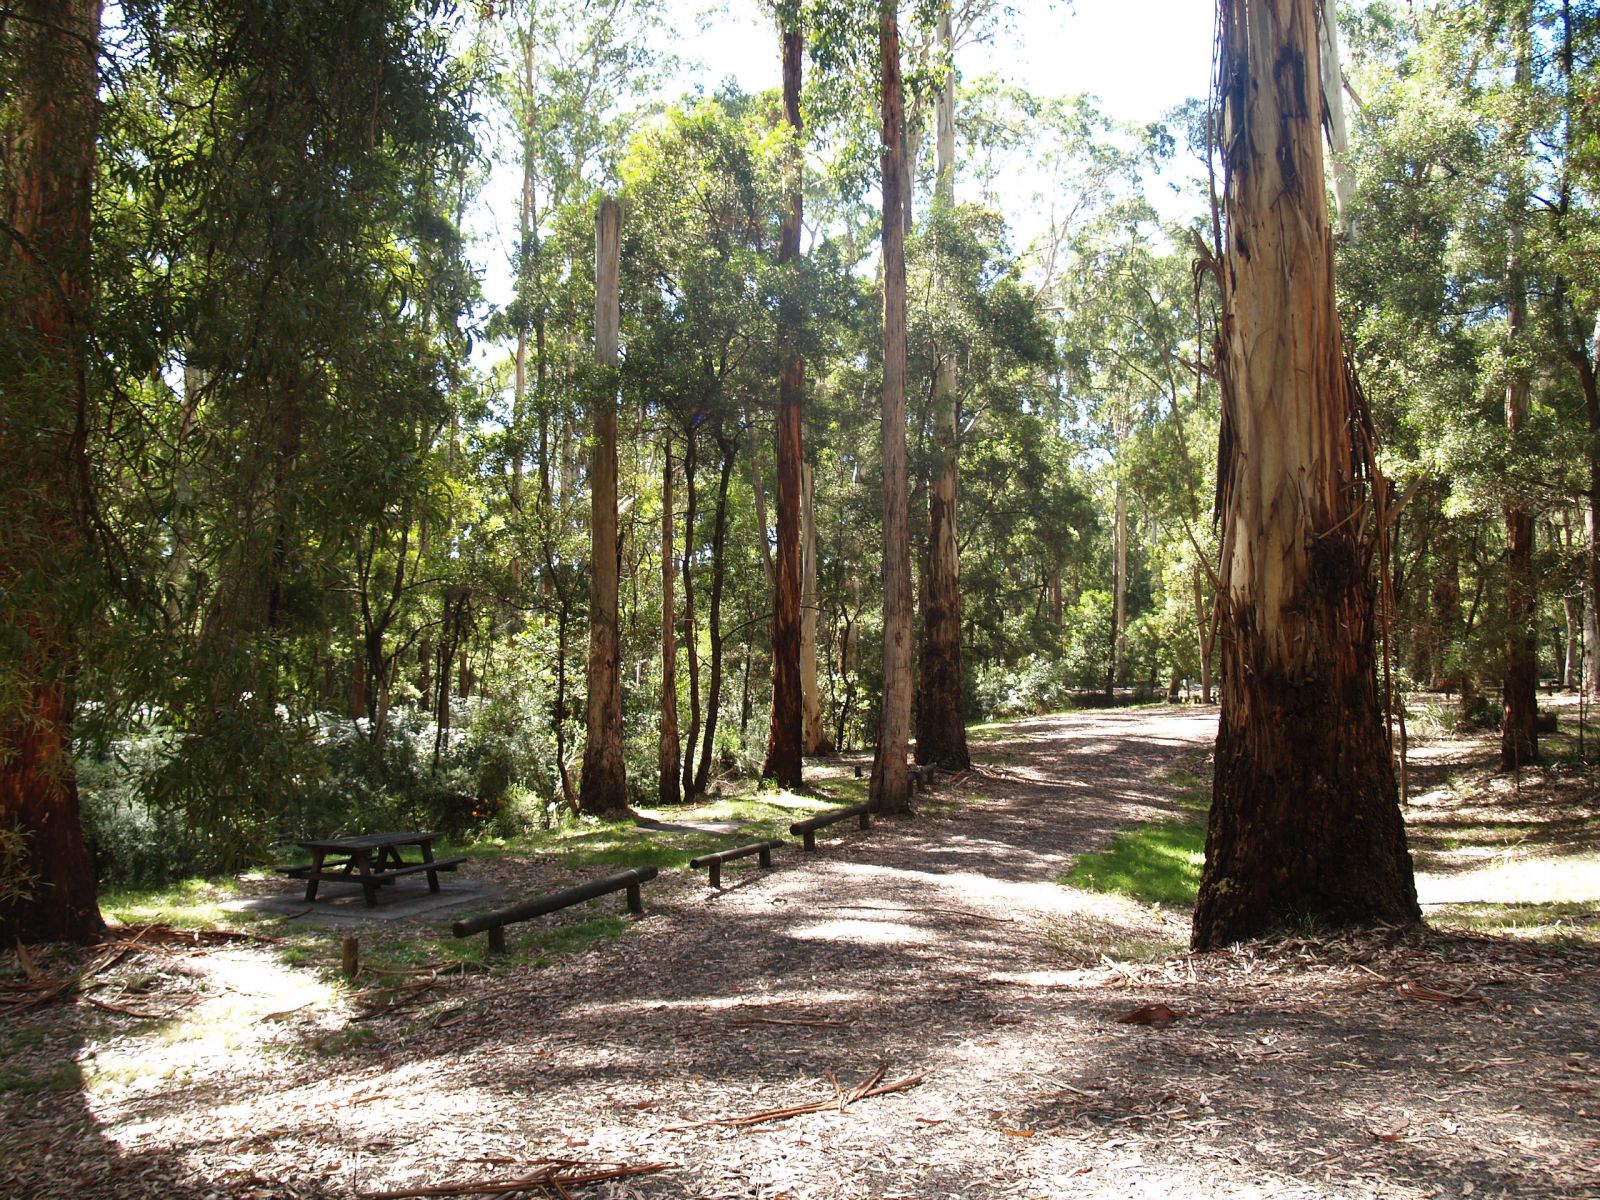 A spacious picnic area surrounded by tall trees